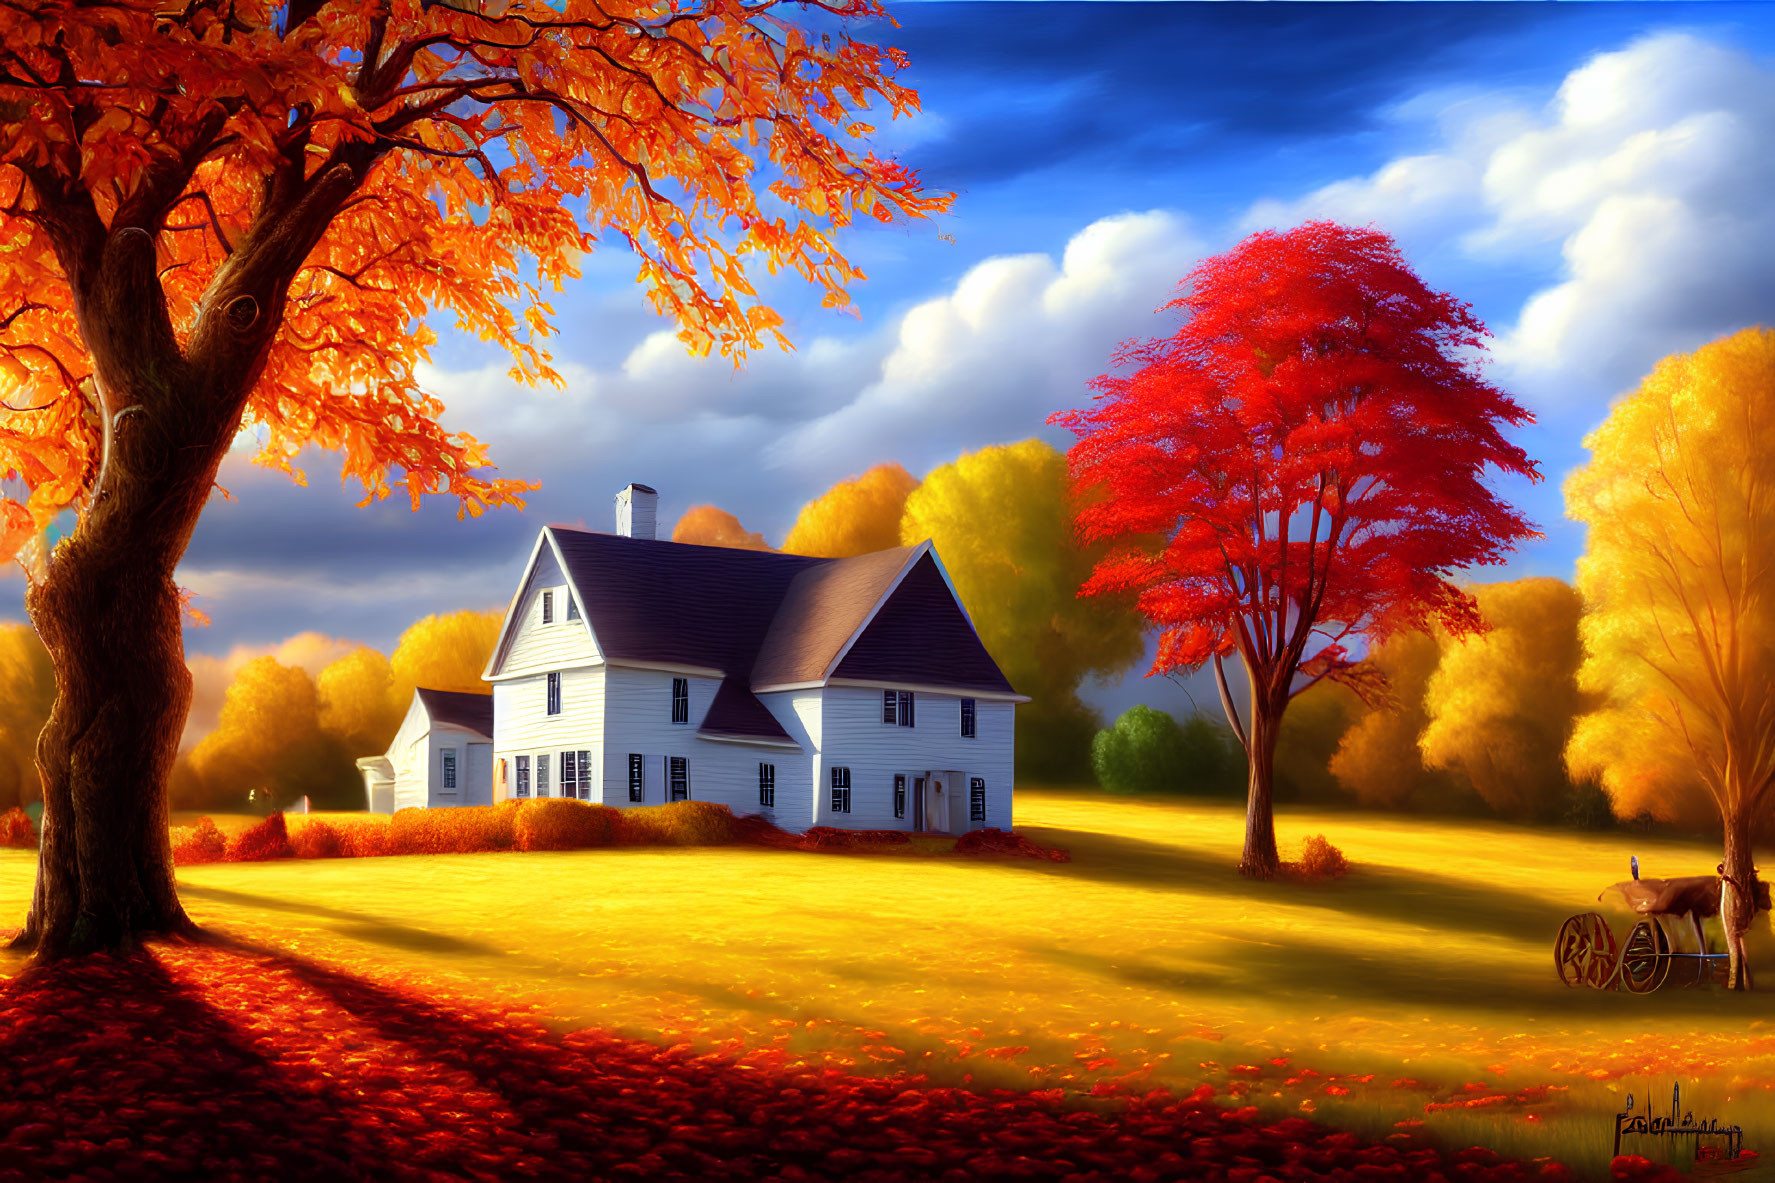 Vibrant autumn landscape with orange and red trees, white house, wooden cart, blue sky.